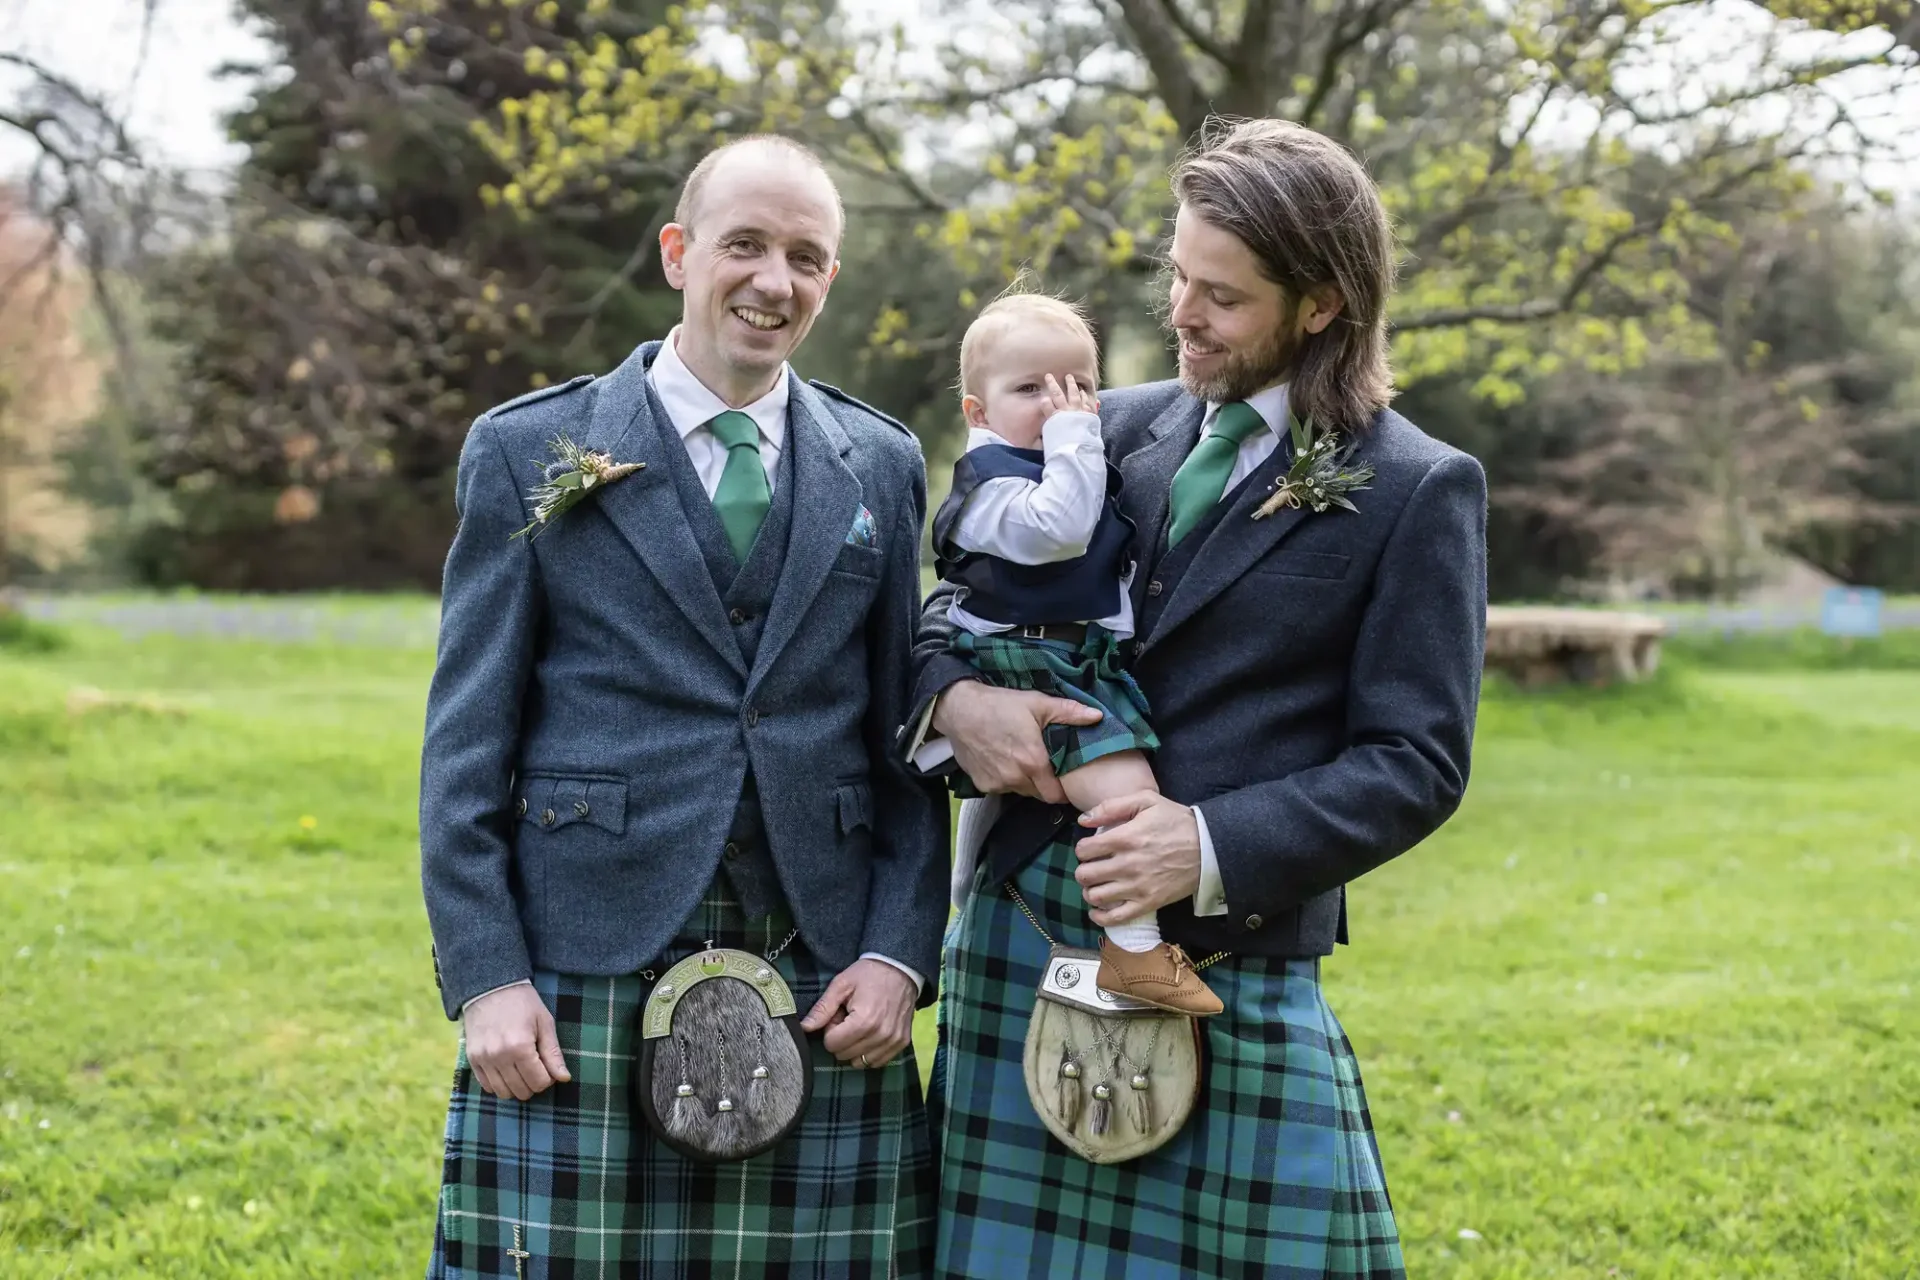 Two men dressed in traditional Scottish kilts stand outdoors, one holding a baby who is also in a kilt. Trees and greenery are visible in the background.